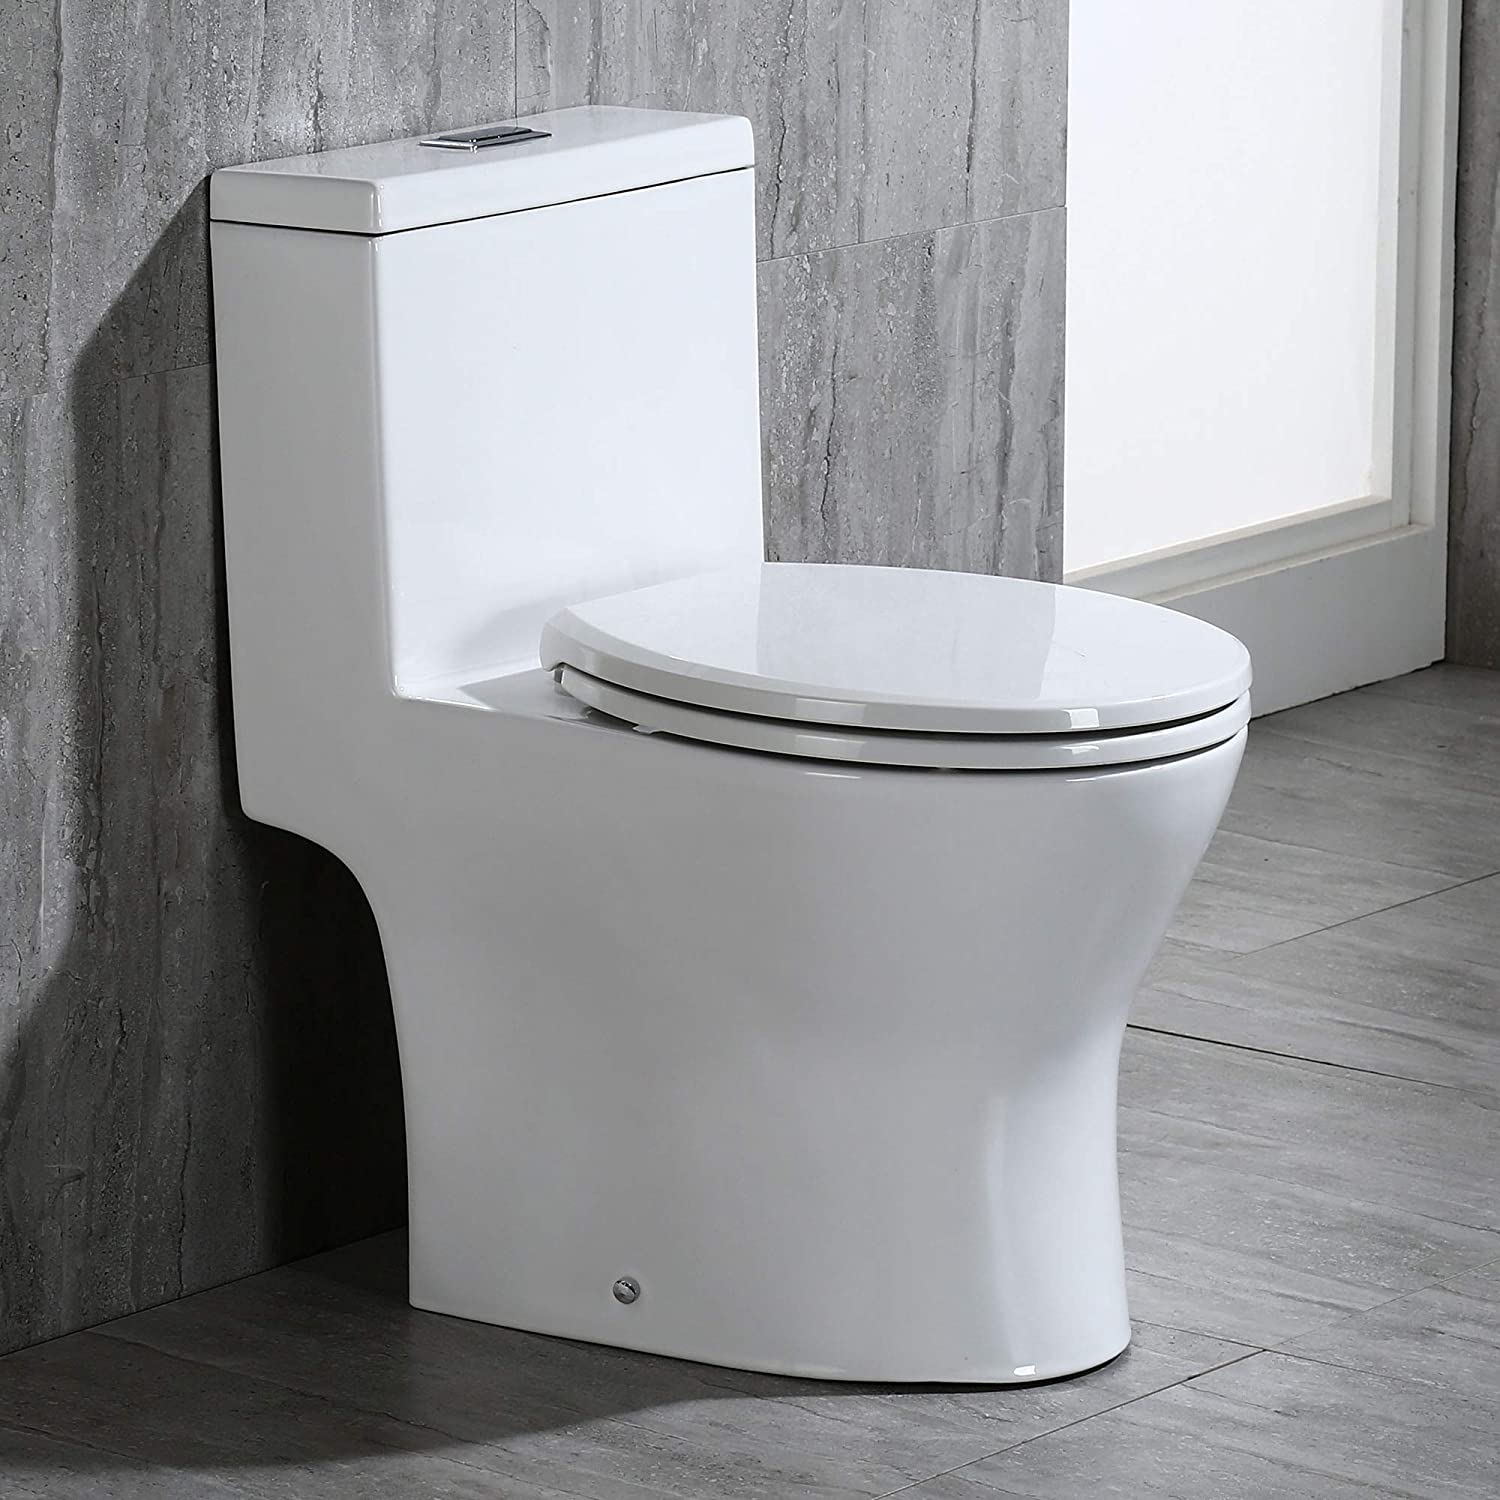 WOODBRIDGE B0500-2 T-0031L T-0031 Short Compact Tiny One Piece Soft Closing Seat, Small Toilet, WHITE